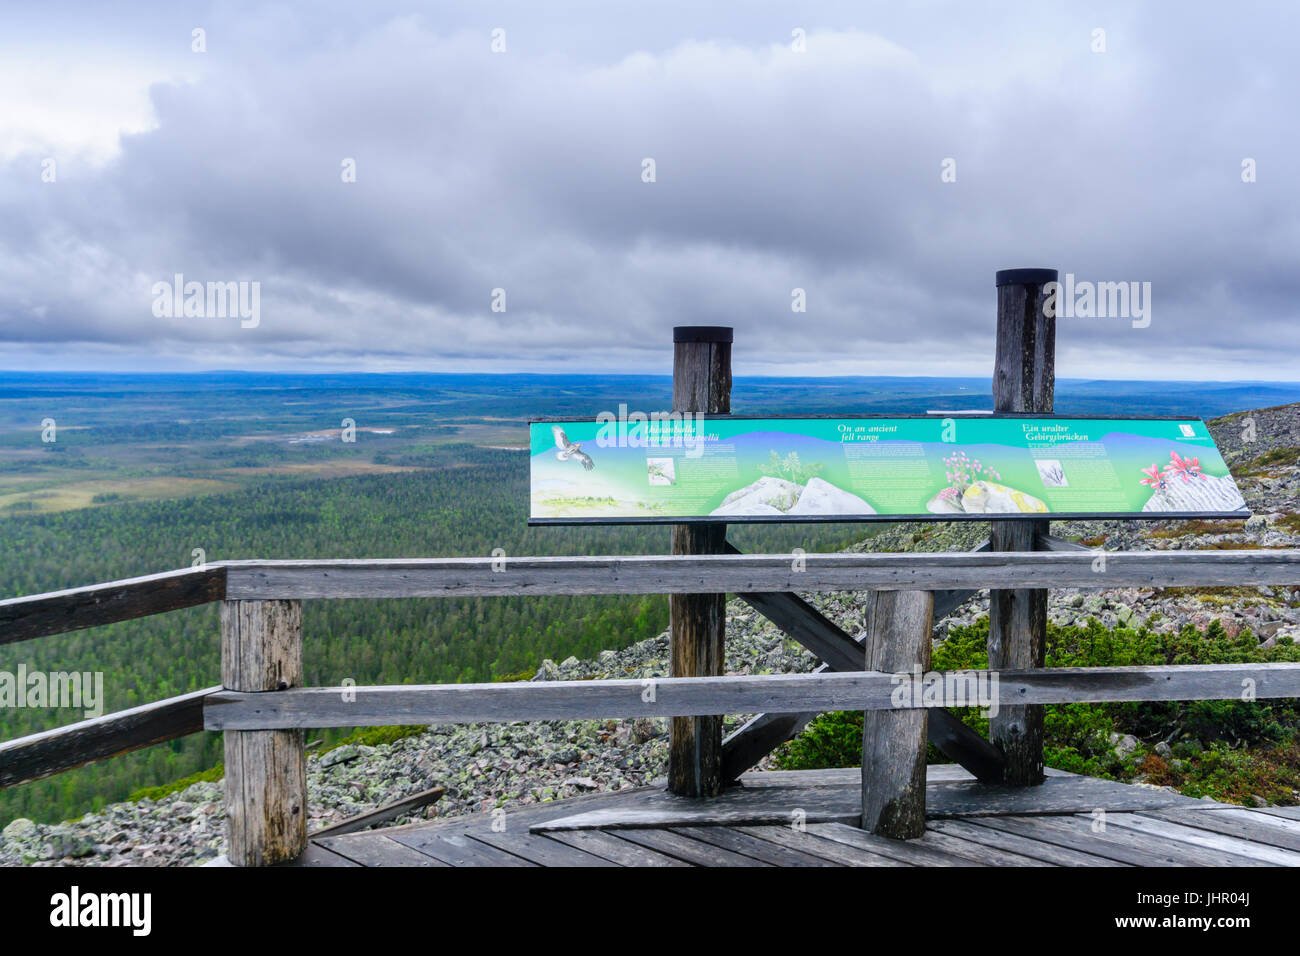 LUOSTO, FINLAND - JUNE 21, 2017: Information signs and landscape from the summit of Ukko-Luosto Fell, in Pyha-Luosto National Park, Lapland, Finland Stock Photo